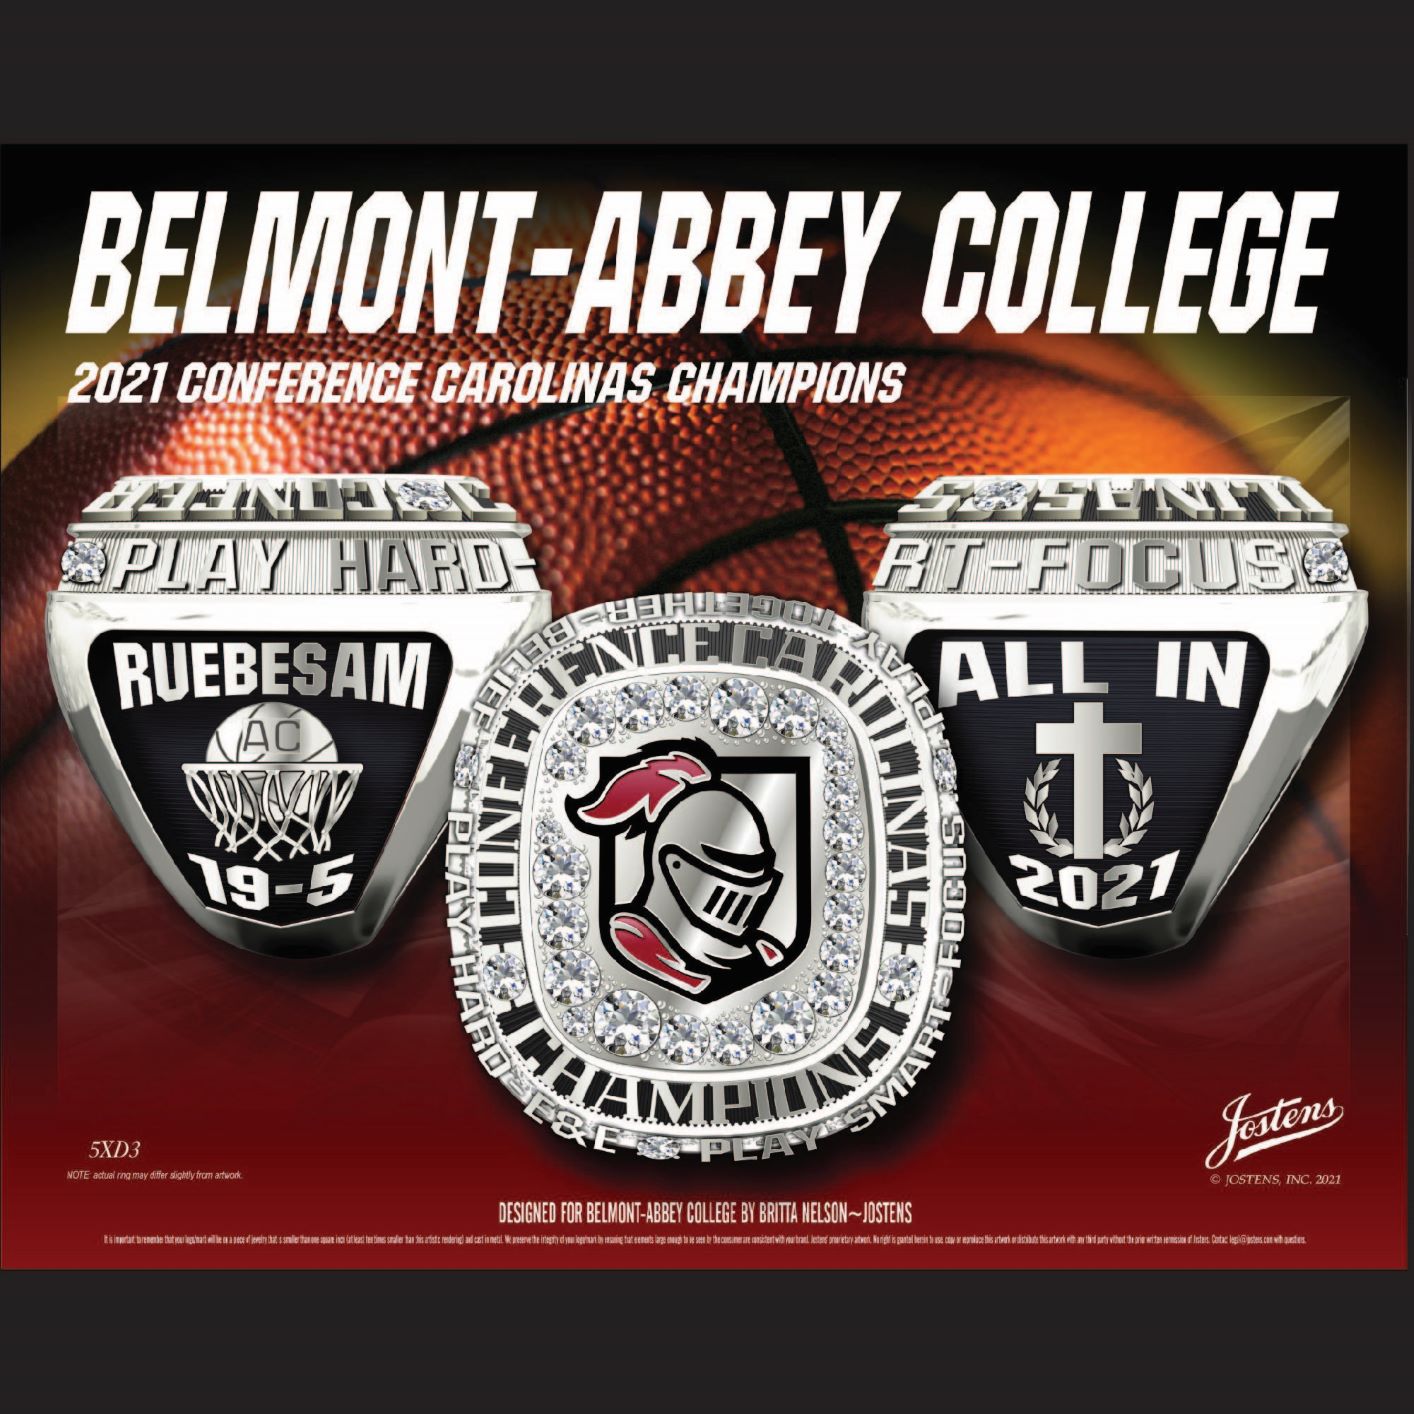 Belmont Abbey College Men's Basketball 2021 Conference Championship Ring